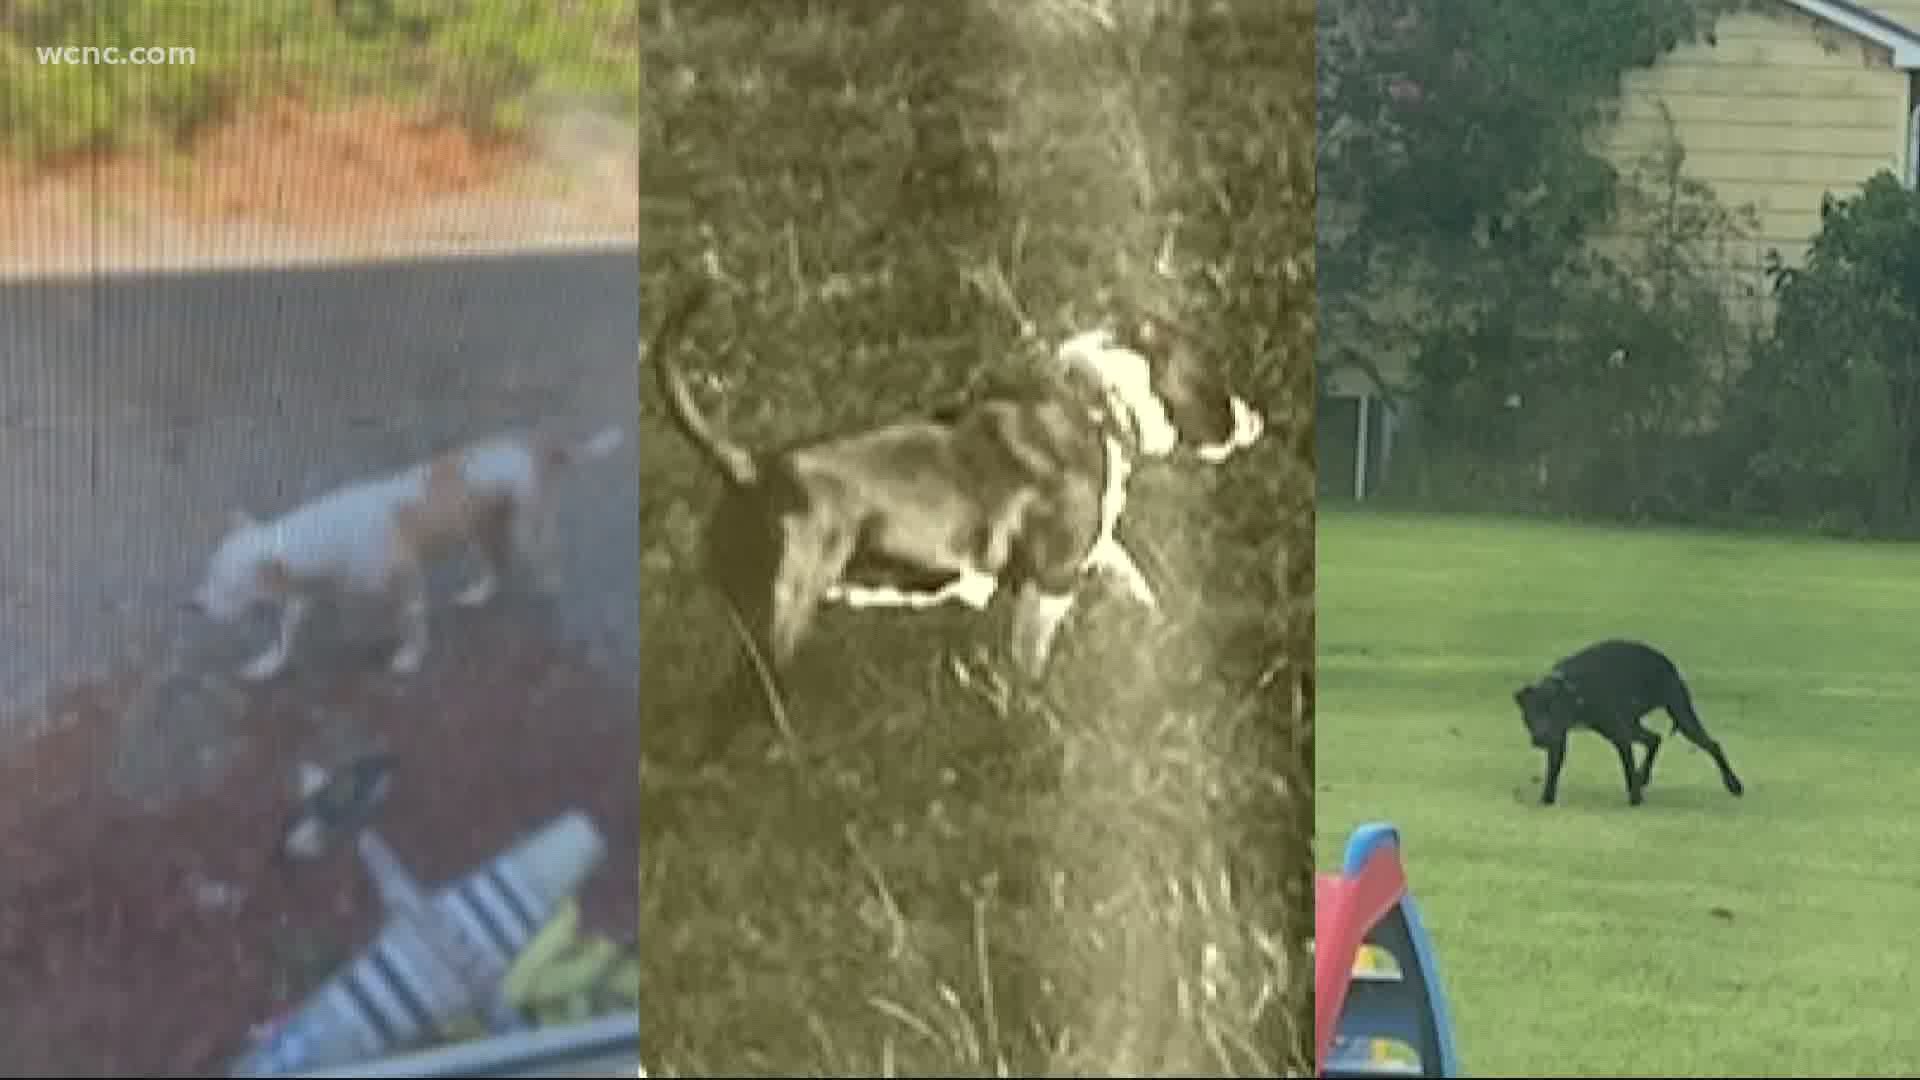 A grandfather says he doesn't want to let his family outside because of a neighbor's loose dogs which have been spotted on his property numerous times.